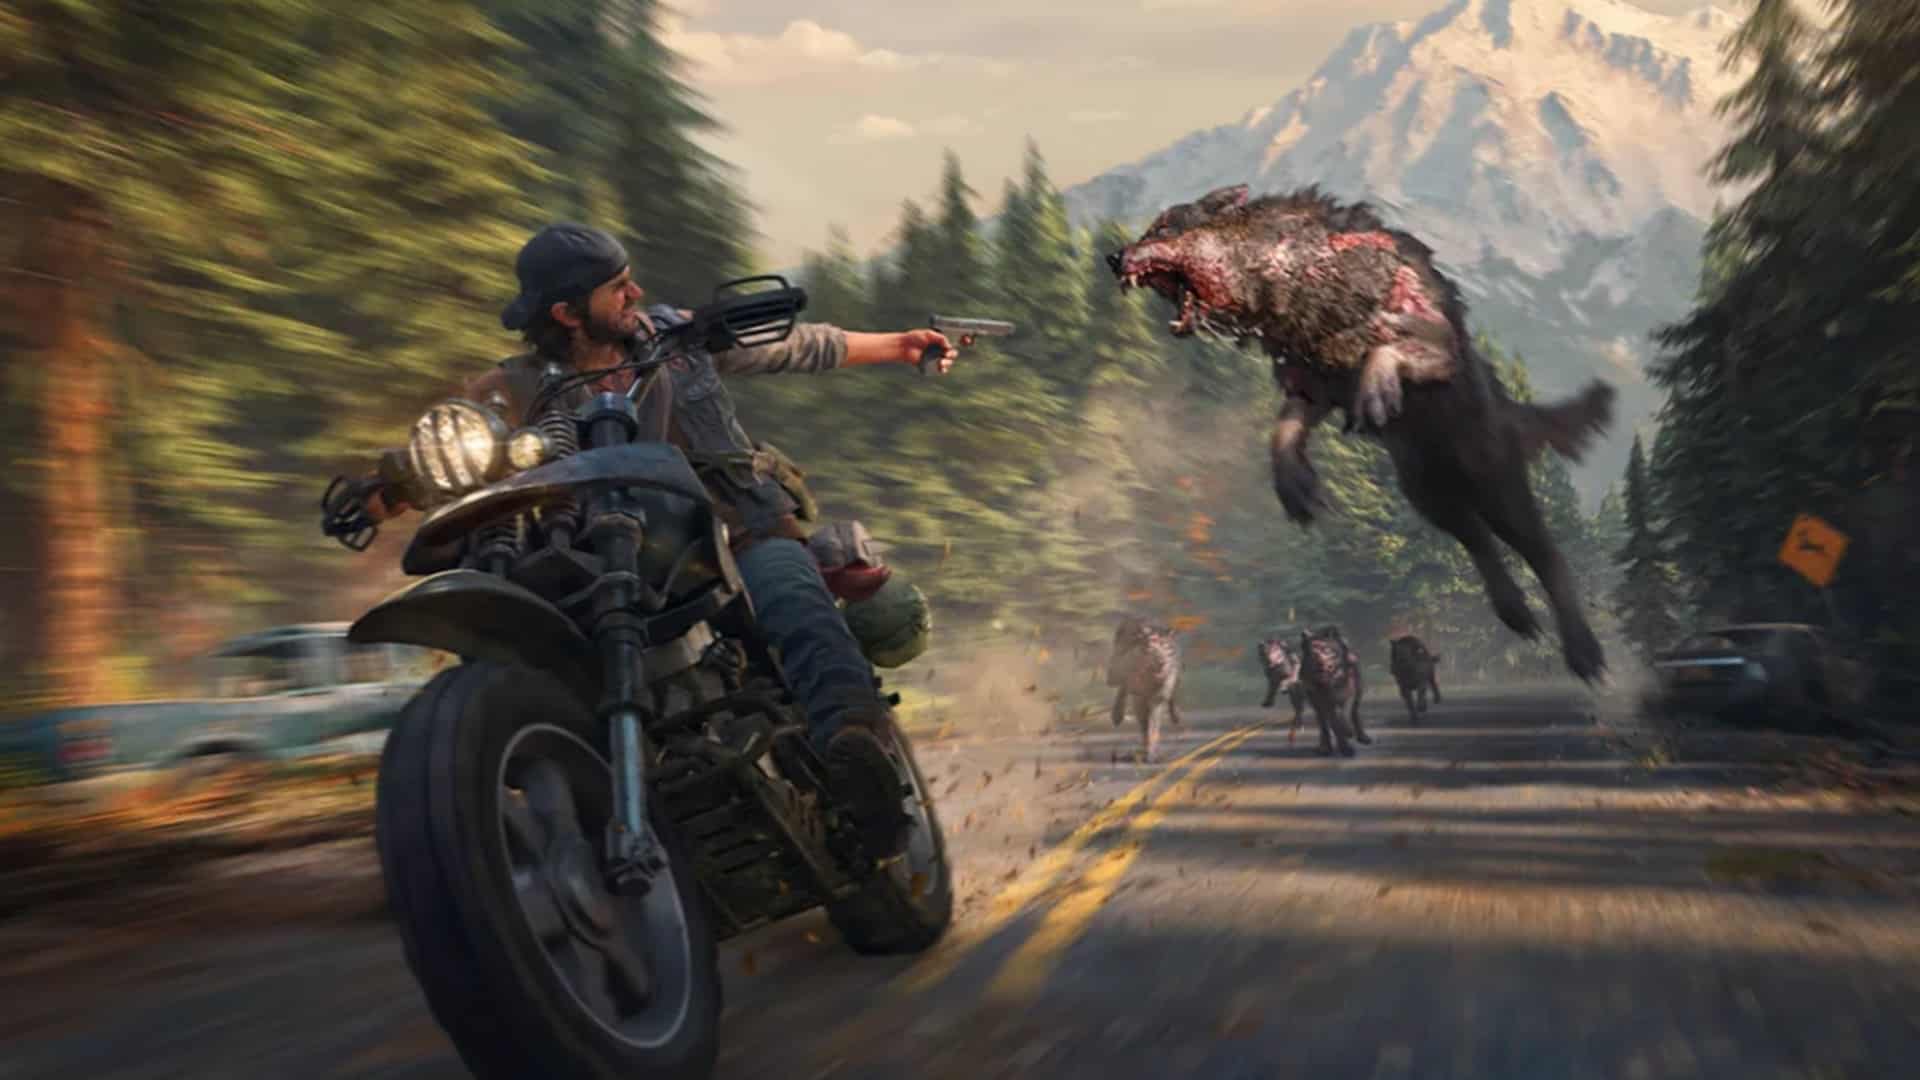 days gone rating ps4